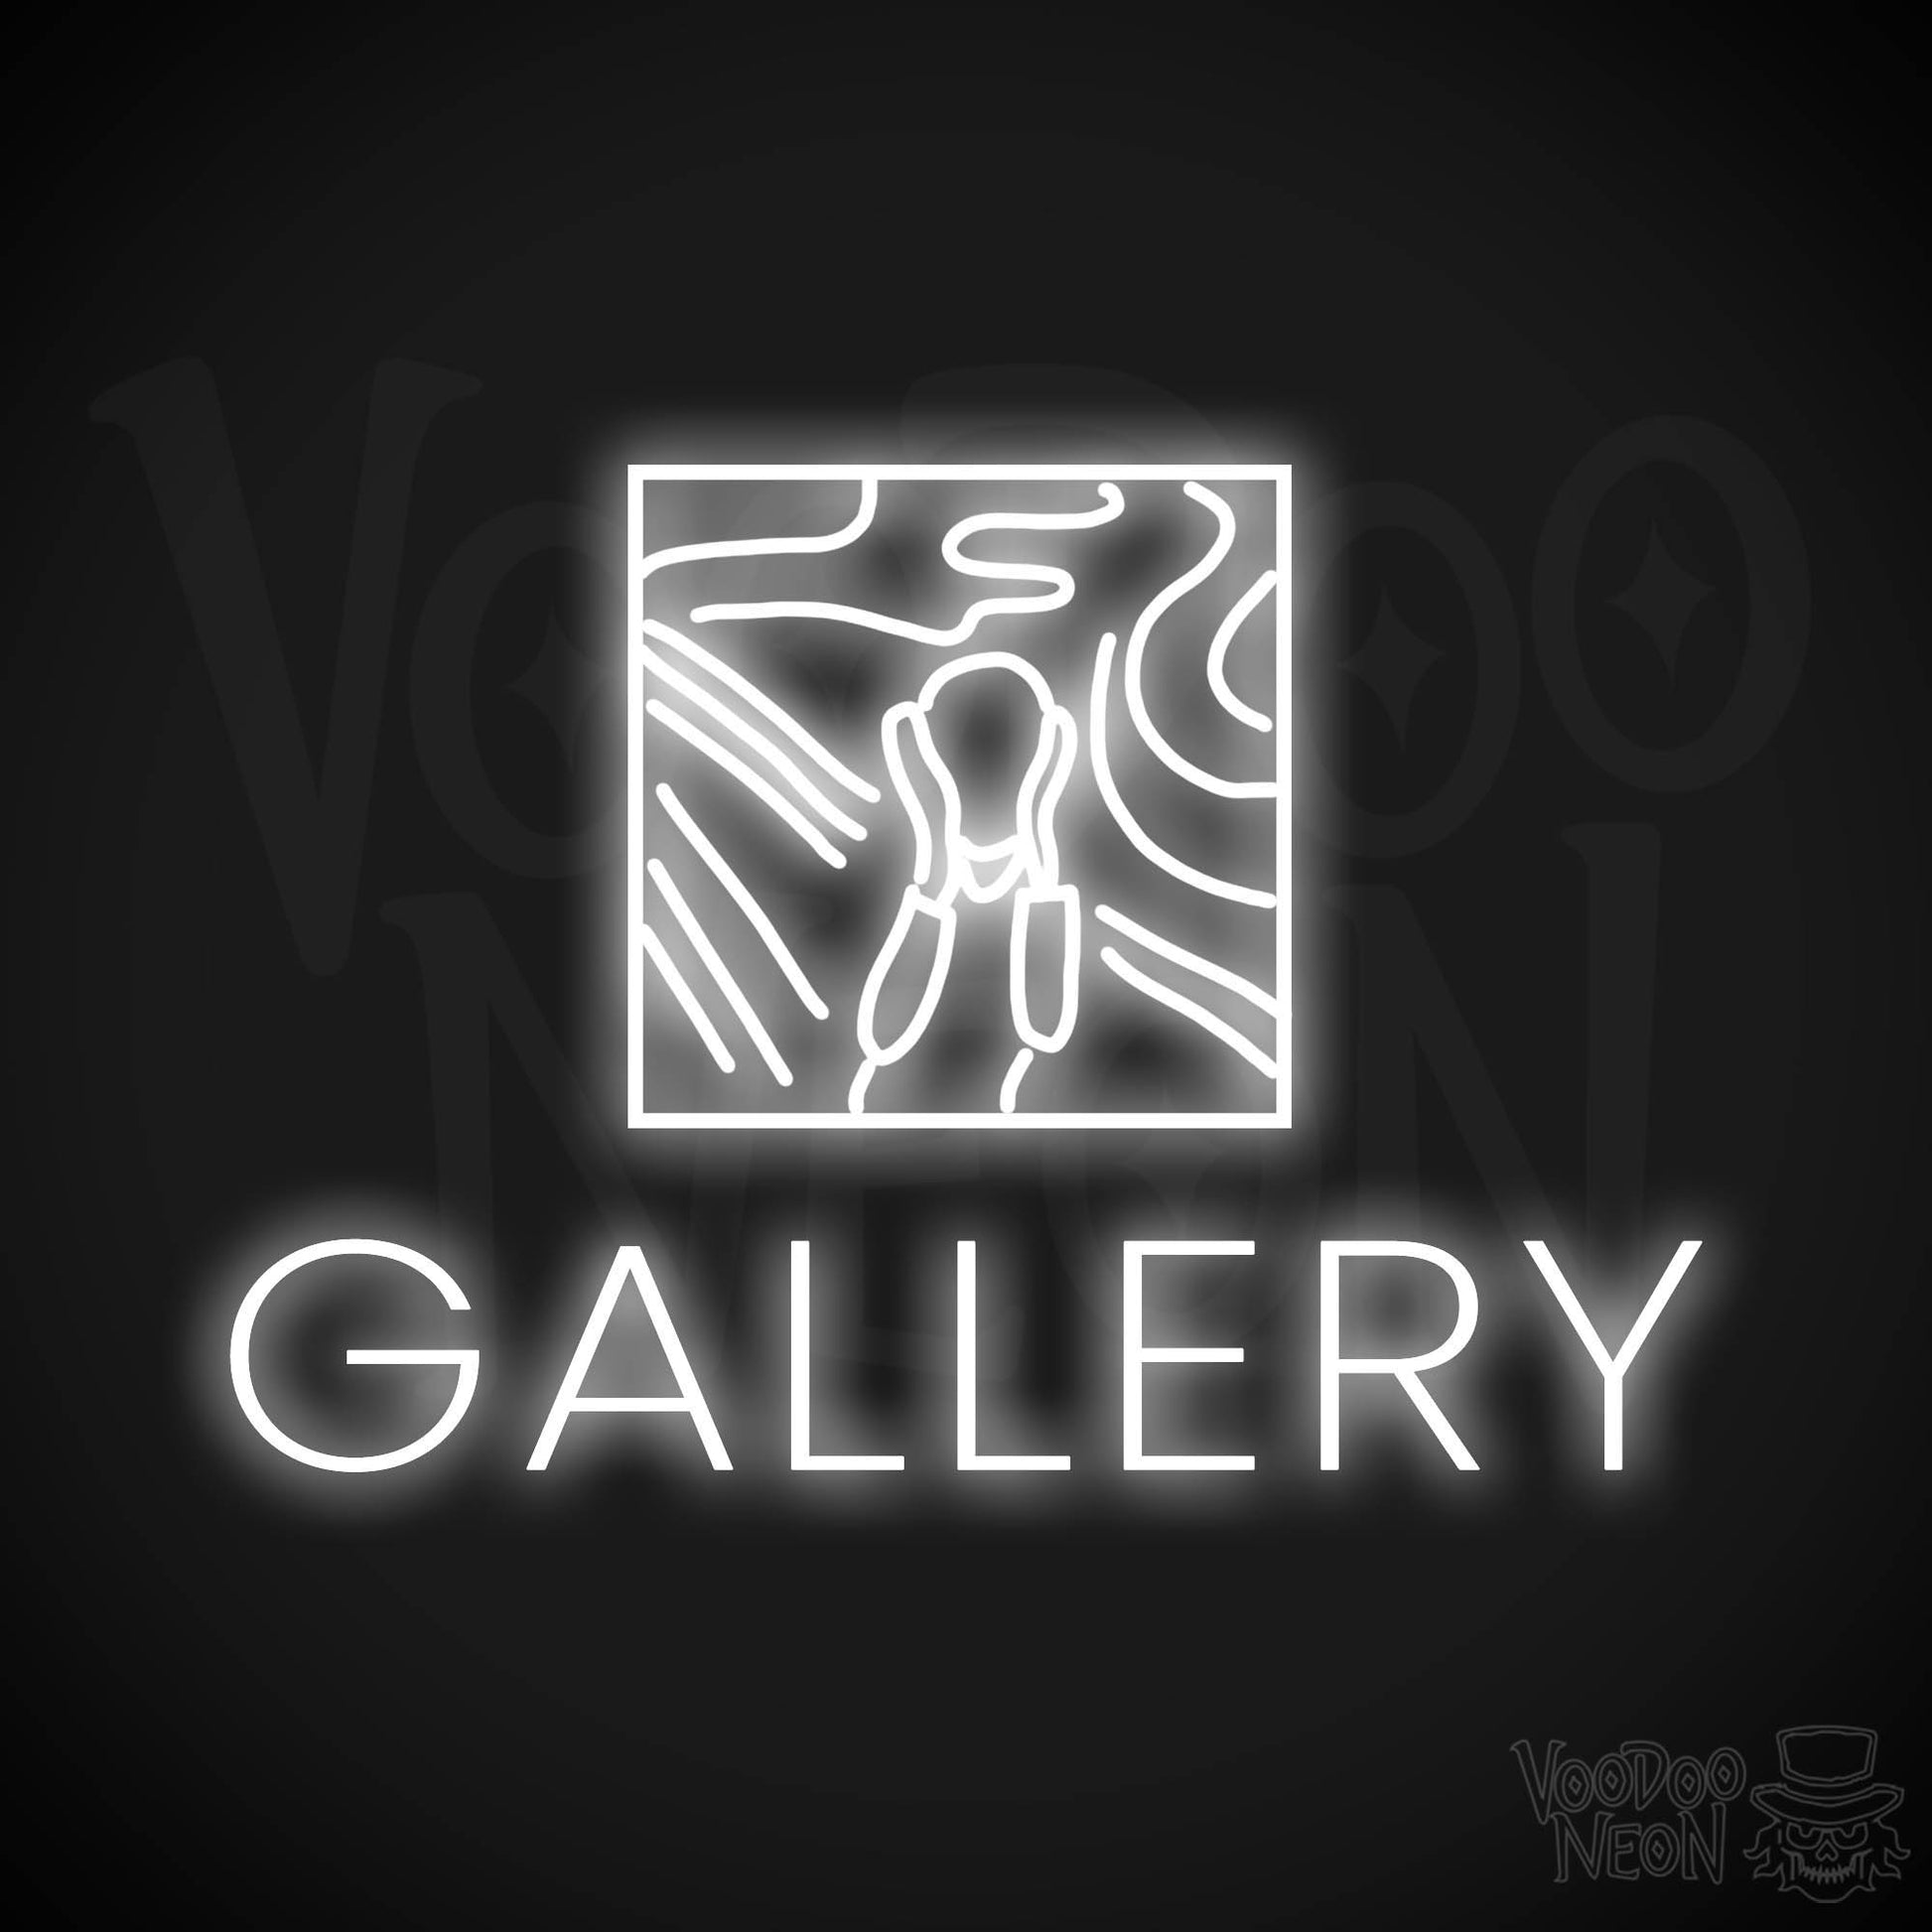 Gallery LED Neon - White